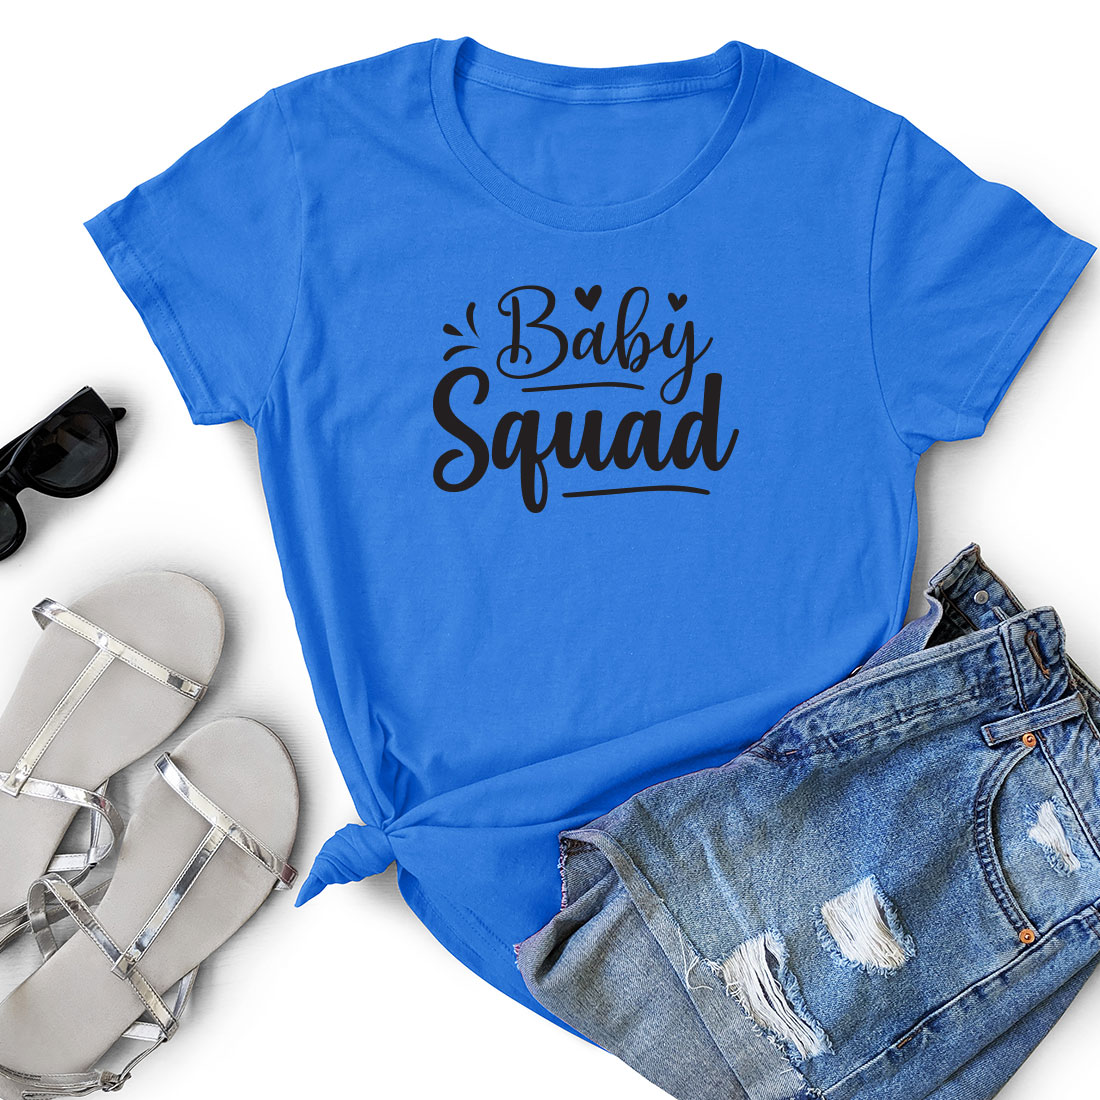 T - shirt that says baby squad next to a pair of shorts.